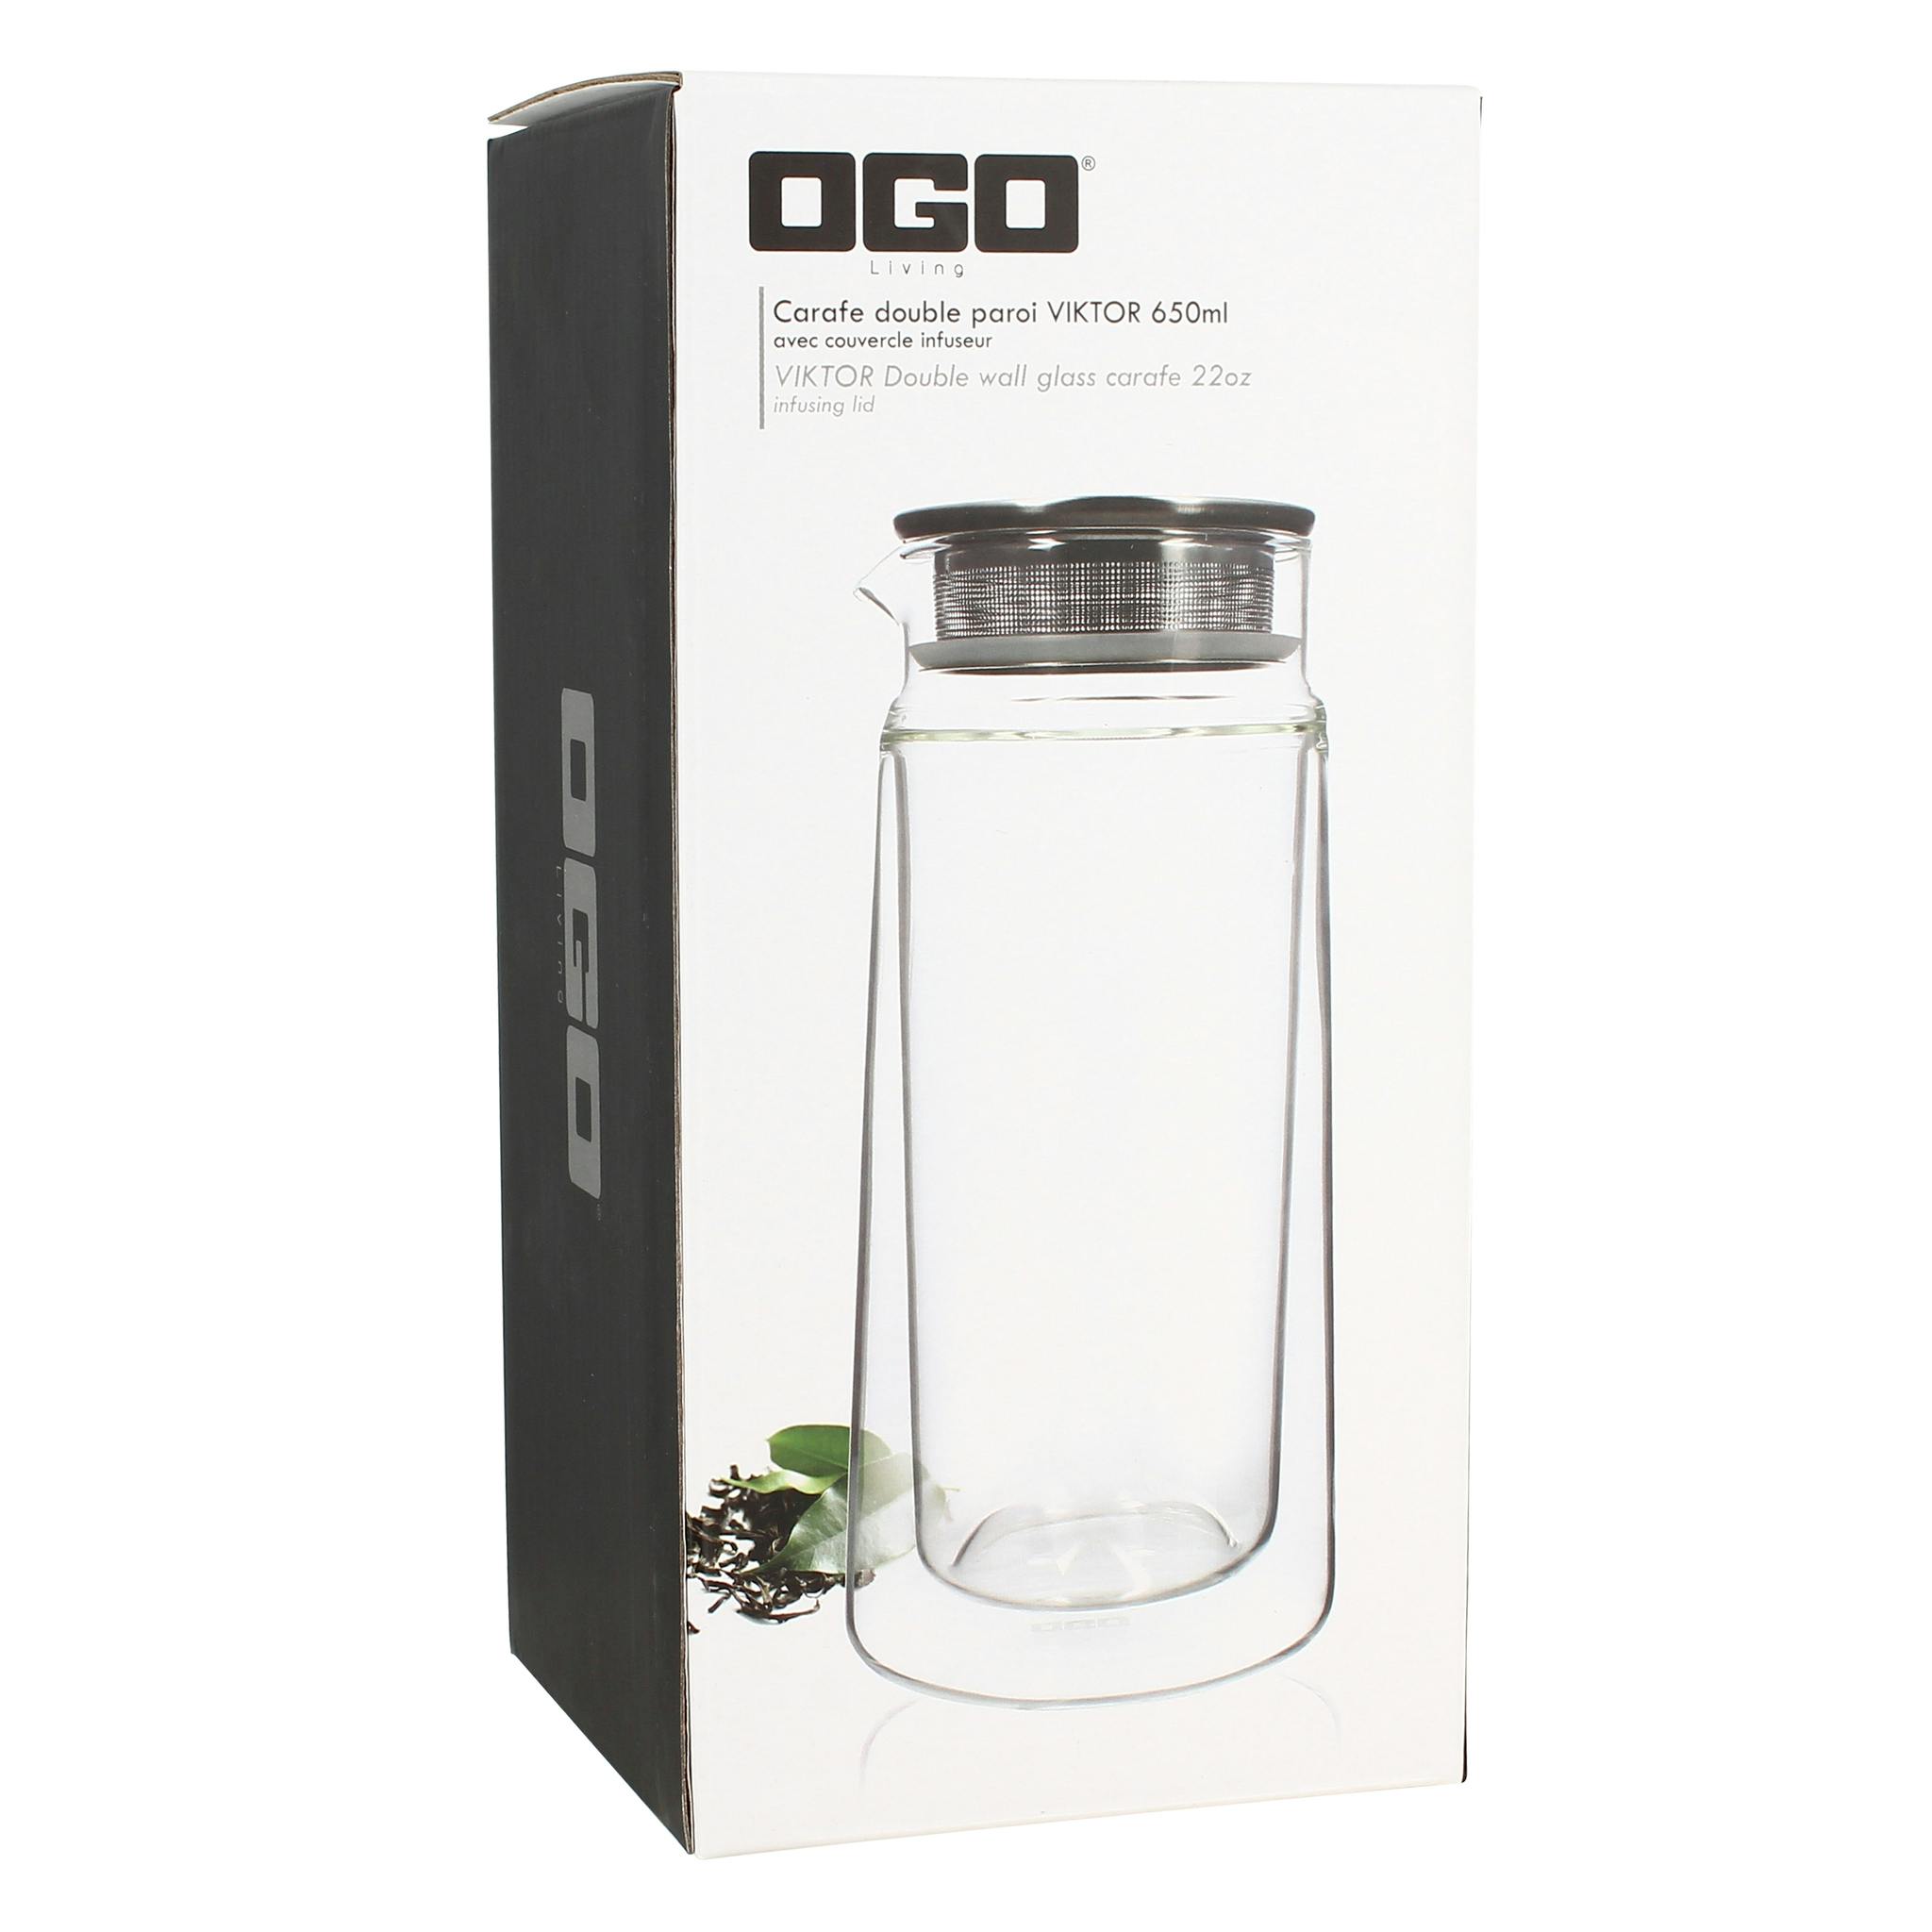 Drinks infuser, infused water, vitamin infused water, cucumber water, cold brew, fridge carafe, great gifts